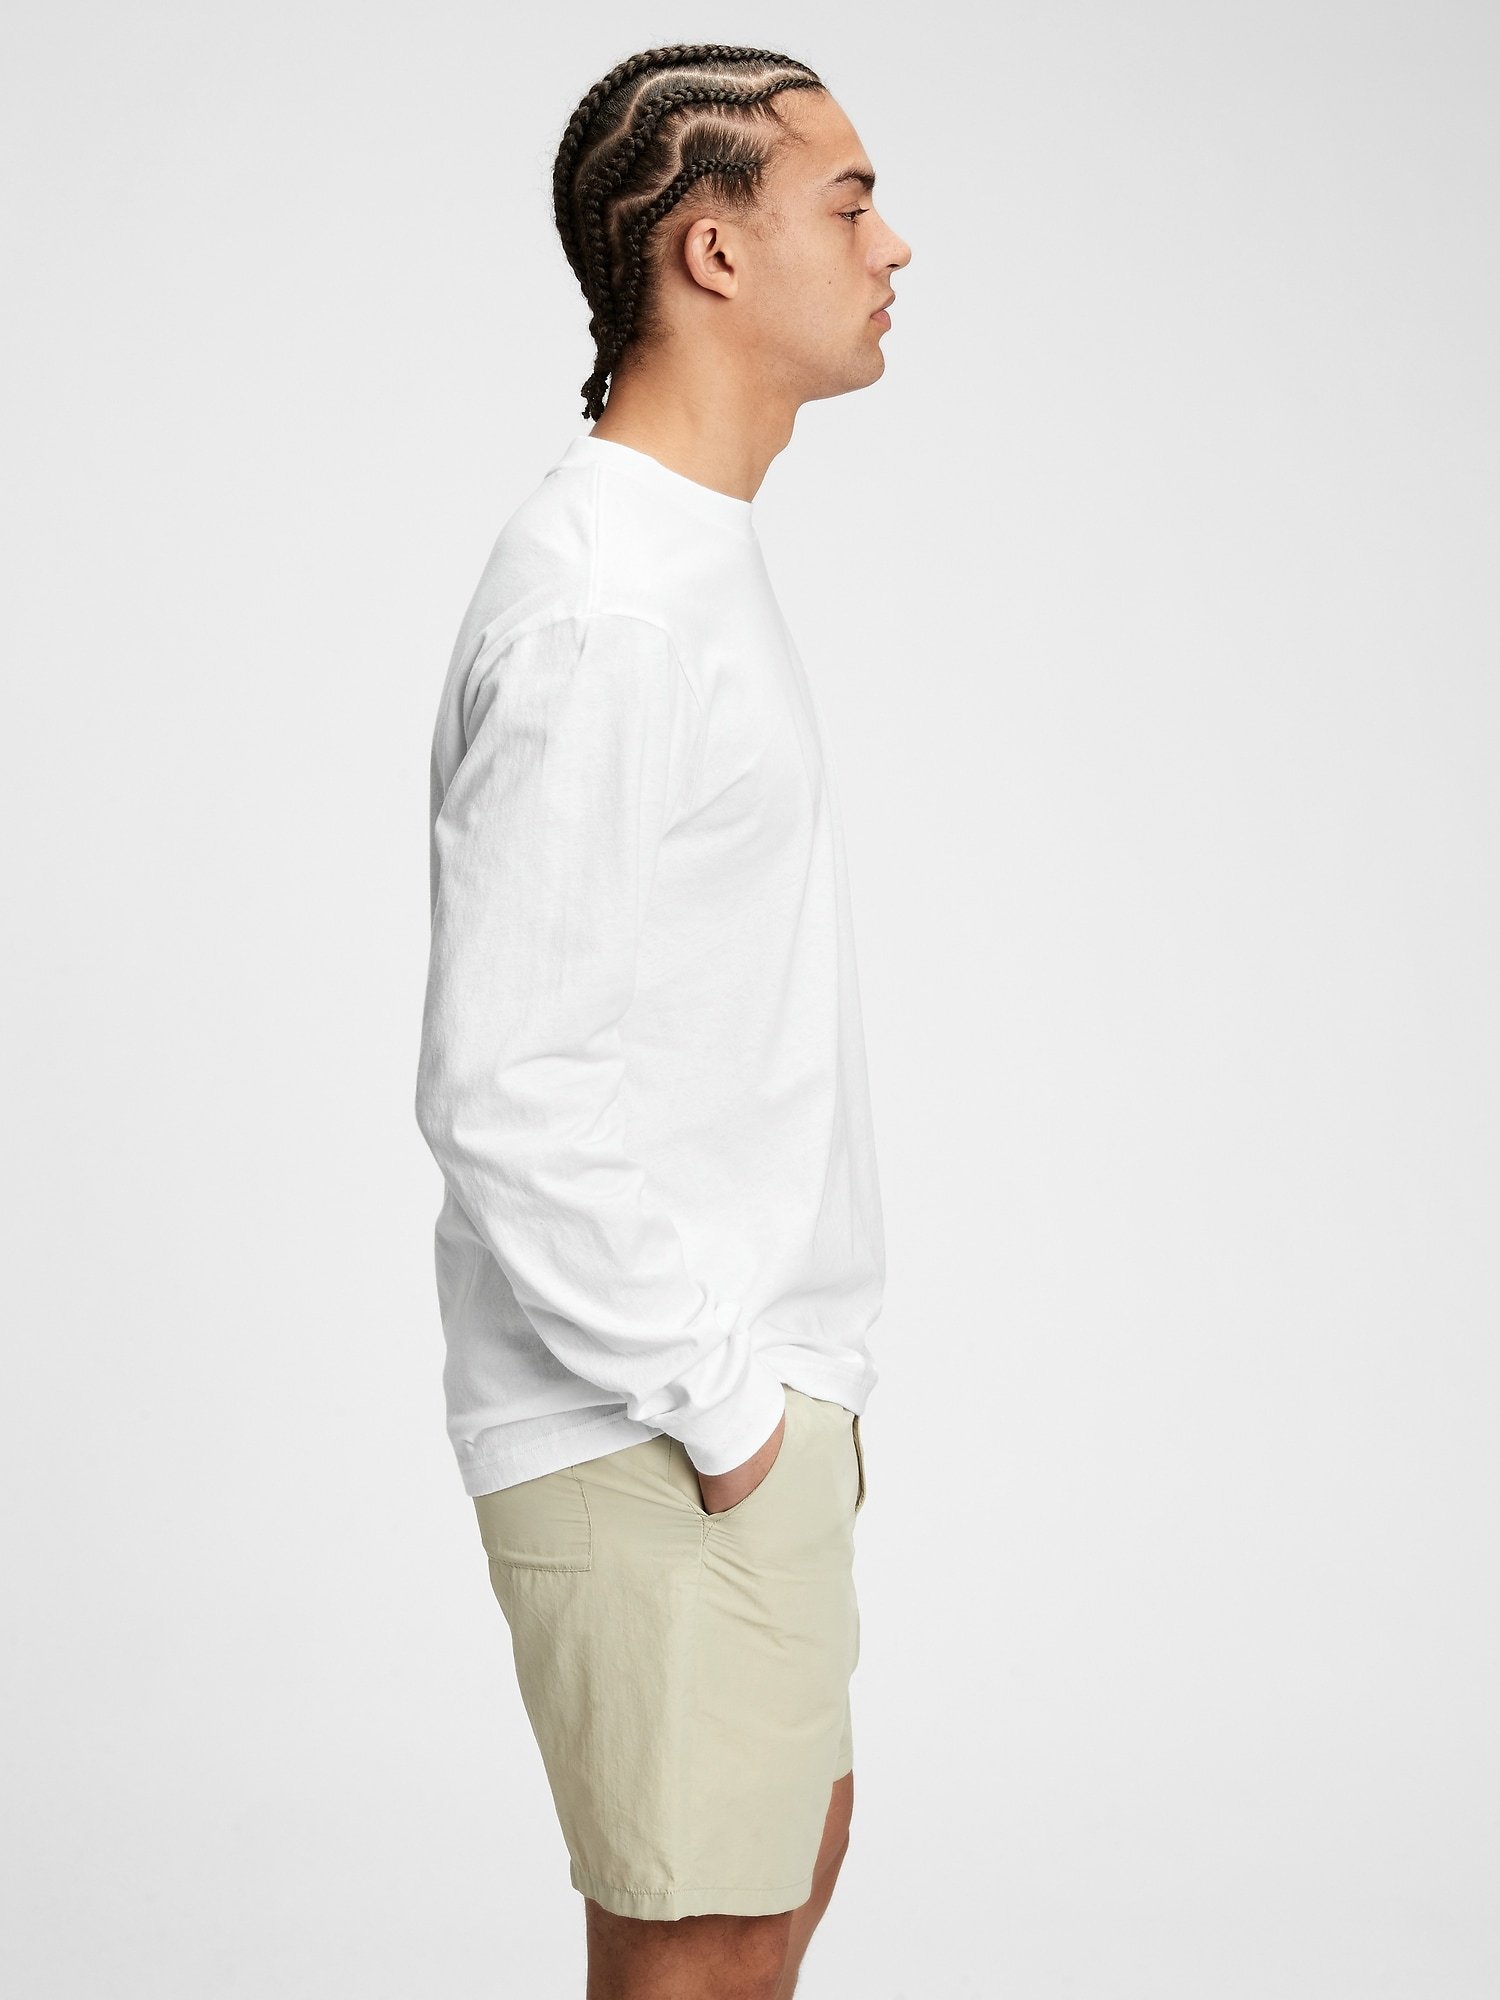 Relaxed Fit T-Shirt product image